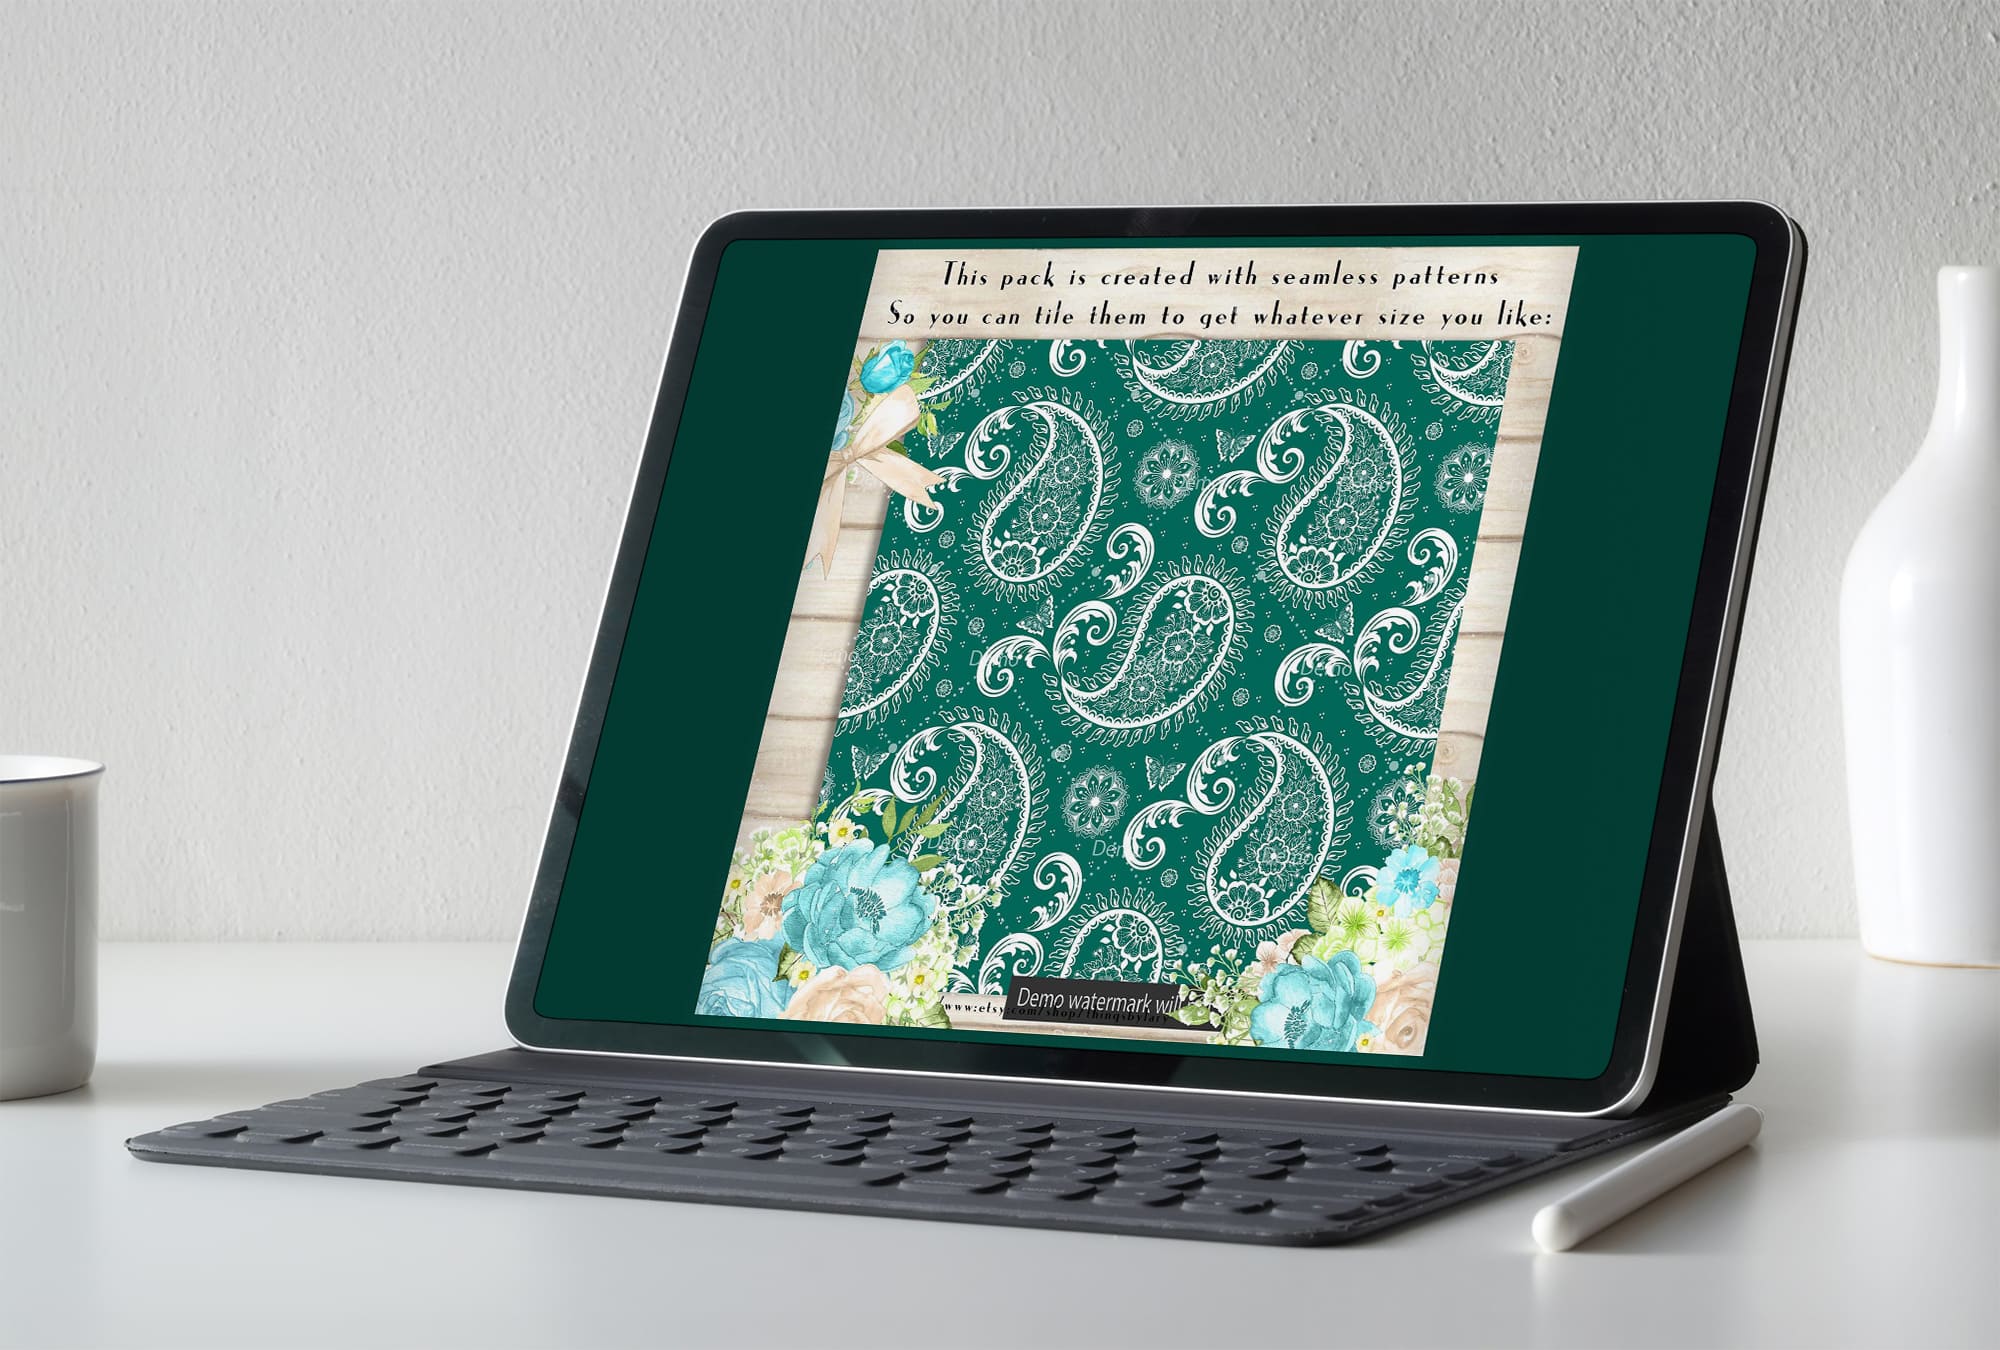 100 Seamless White Lace Paisley Digital Papers on the IPad Mockup.